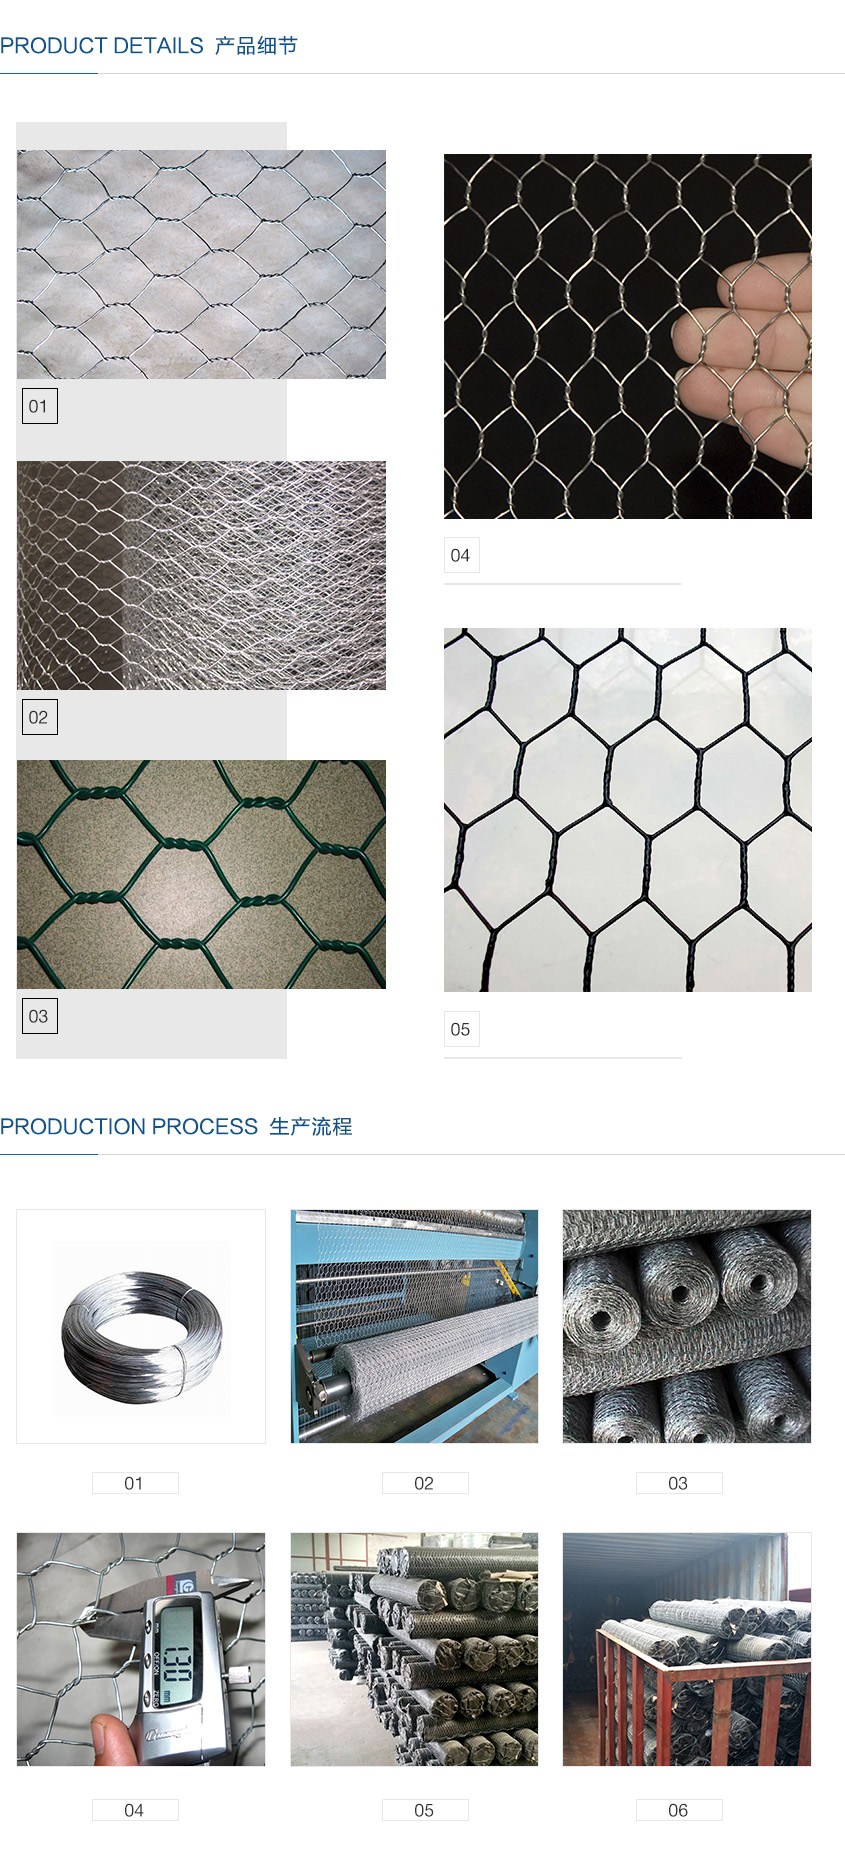  can be used in fixed building walls, heat insulation. It is also used in power plant tie pipes and boiler warm. Moreover, the net is anti-freeze, used as residential protection, landscape protection. Hexagonal wire net is applied in chicken and duck to protect poultry. At engineering, it protects and support the seawall, hillsides, road, bridge and other Mizuki engineering.